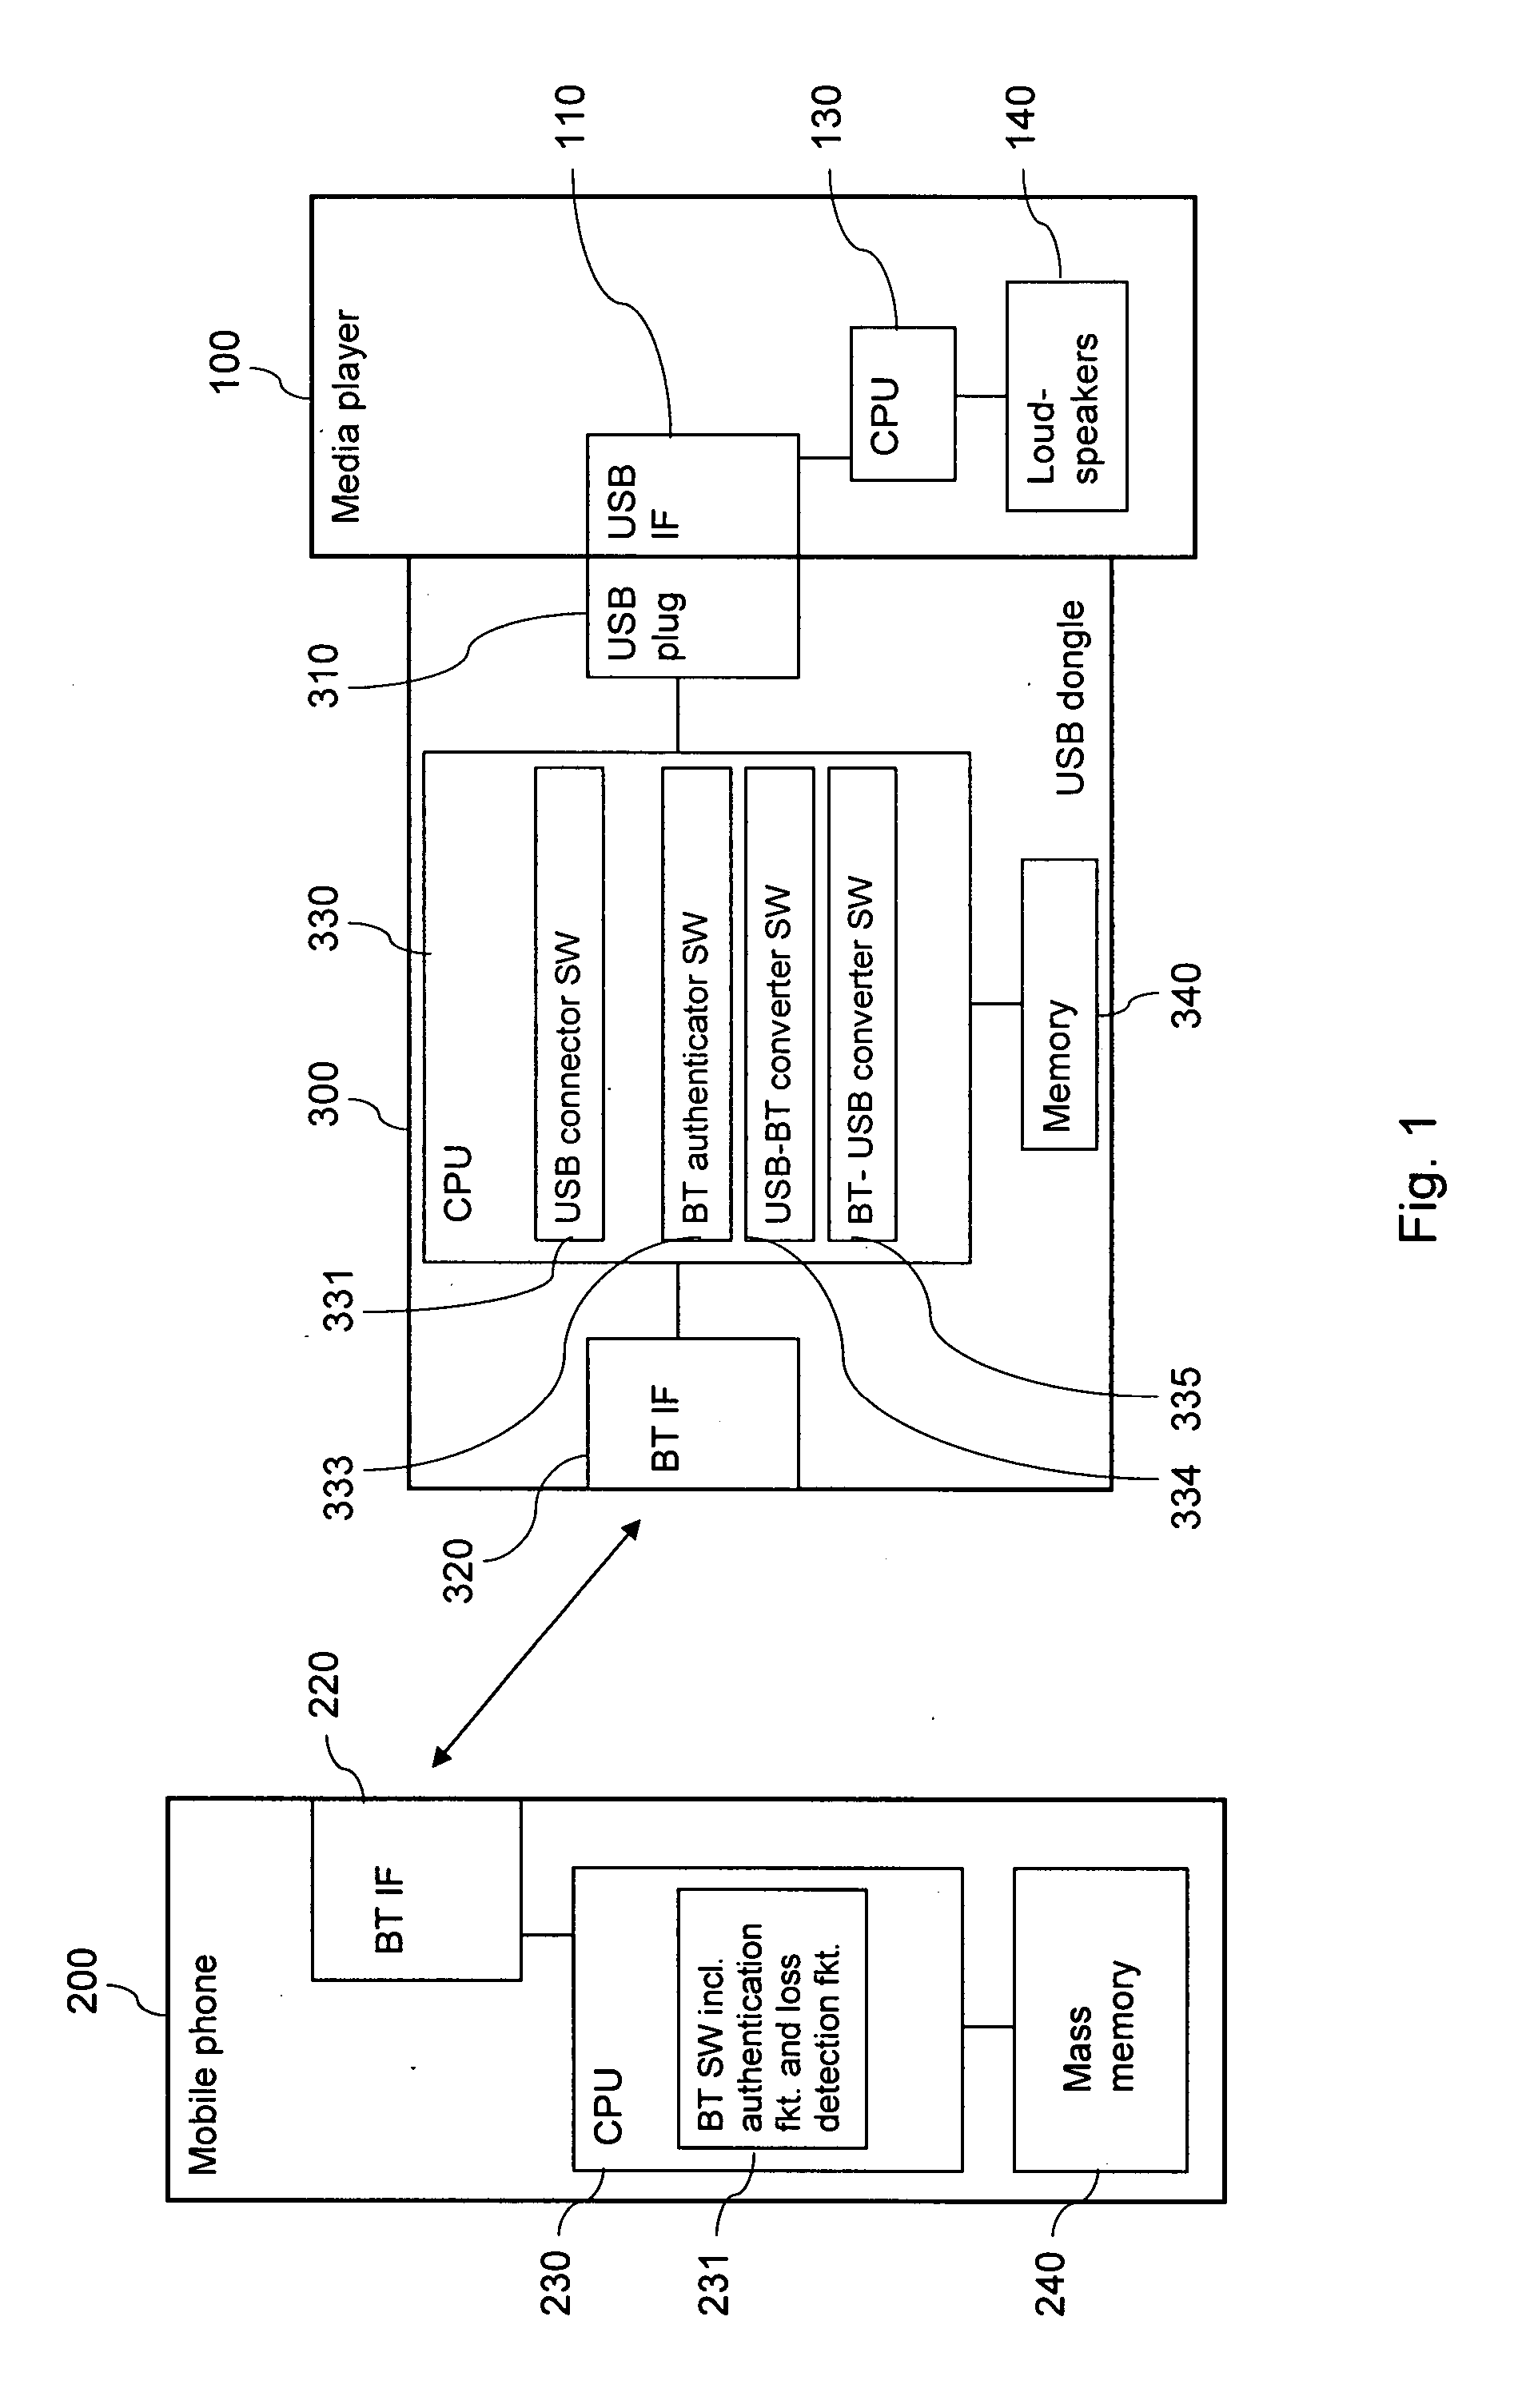 Supporting use of connection via electrical interface